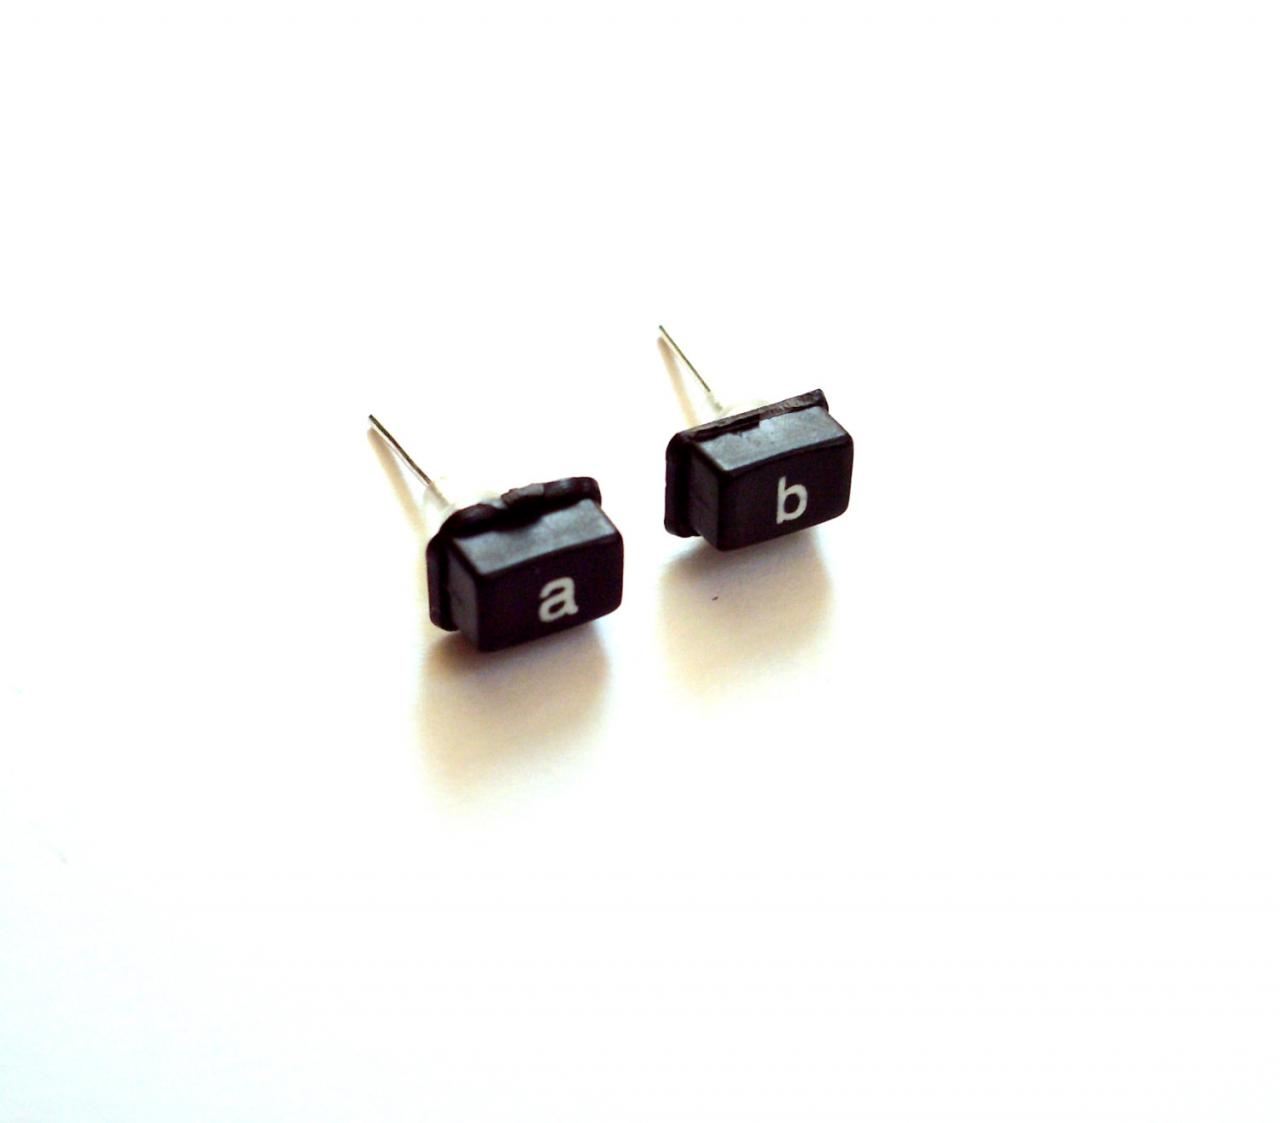 Black Post Geek Earrings Made Of Reused Calculator Buttons, Upcycled Recycled Repurposed Nerd Jewelry Minimalist Studs